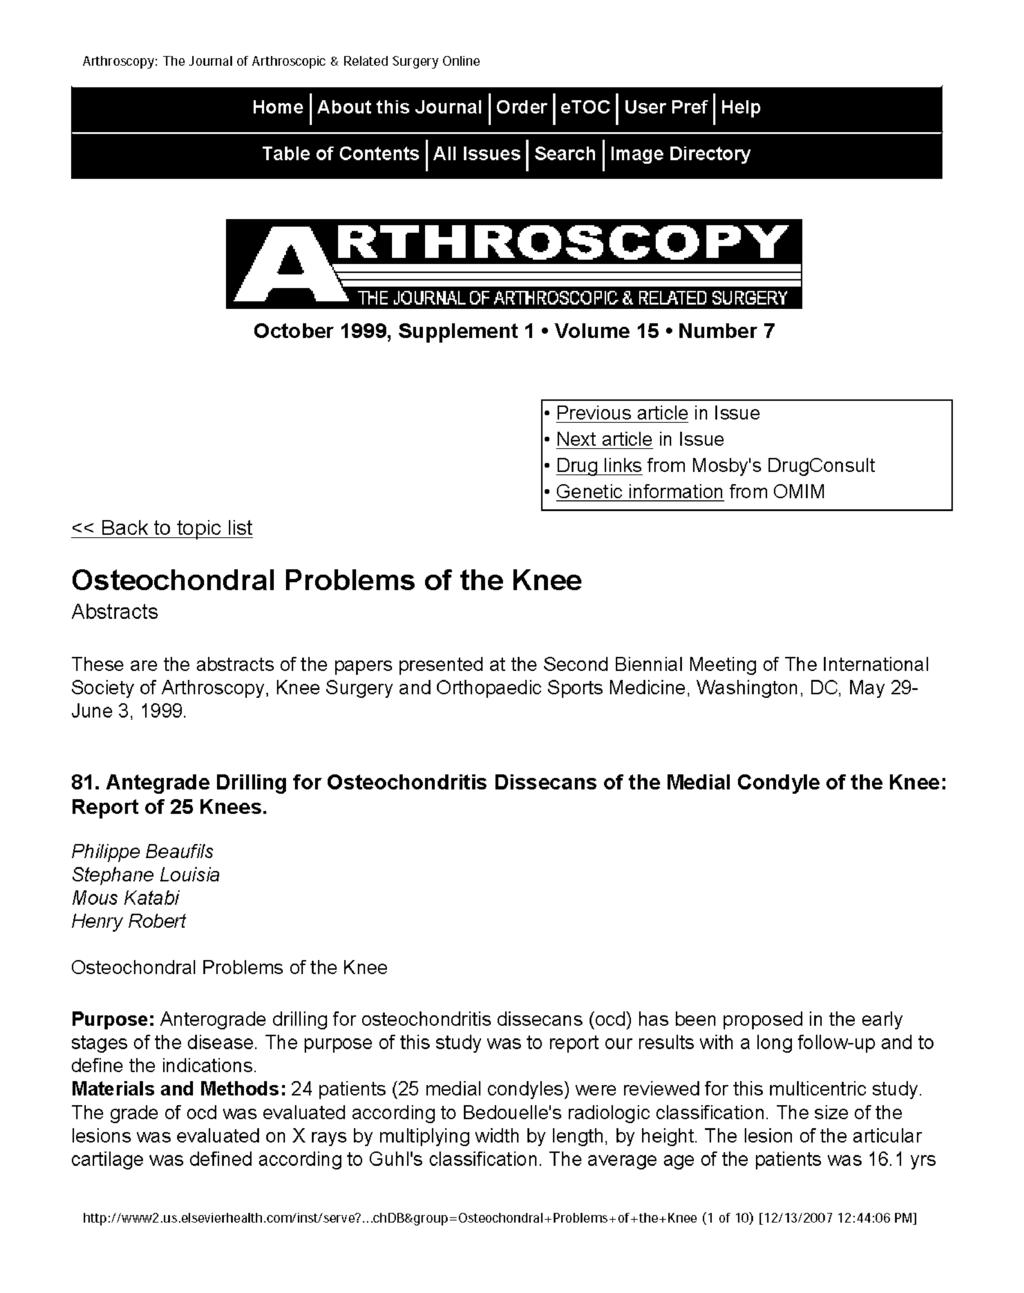 Arthroscopy: The Journal of Arthroscopic & Related Surgery Online October 1999, Supplement 1 Volume 15 Number 7 << Back to topic list Abstracts Previous article in Issue Next article in Issue Drug